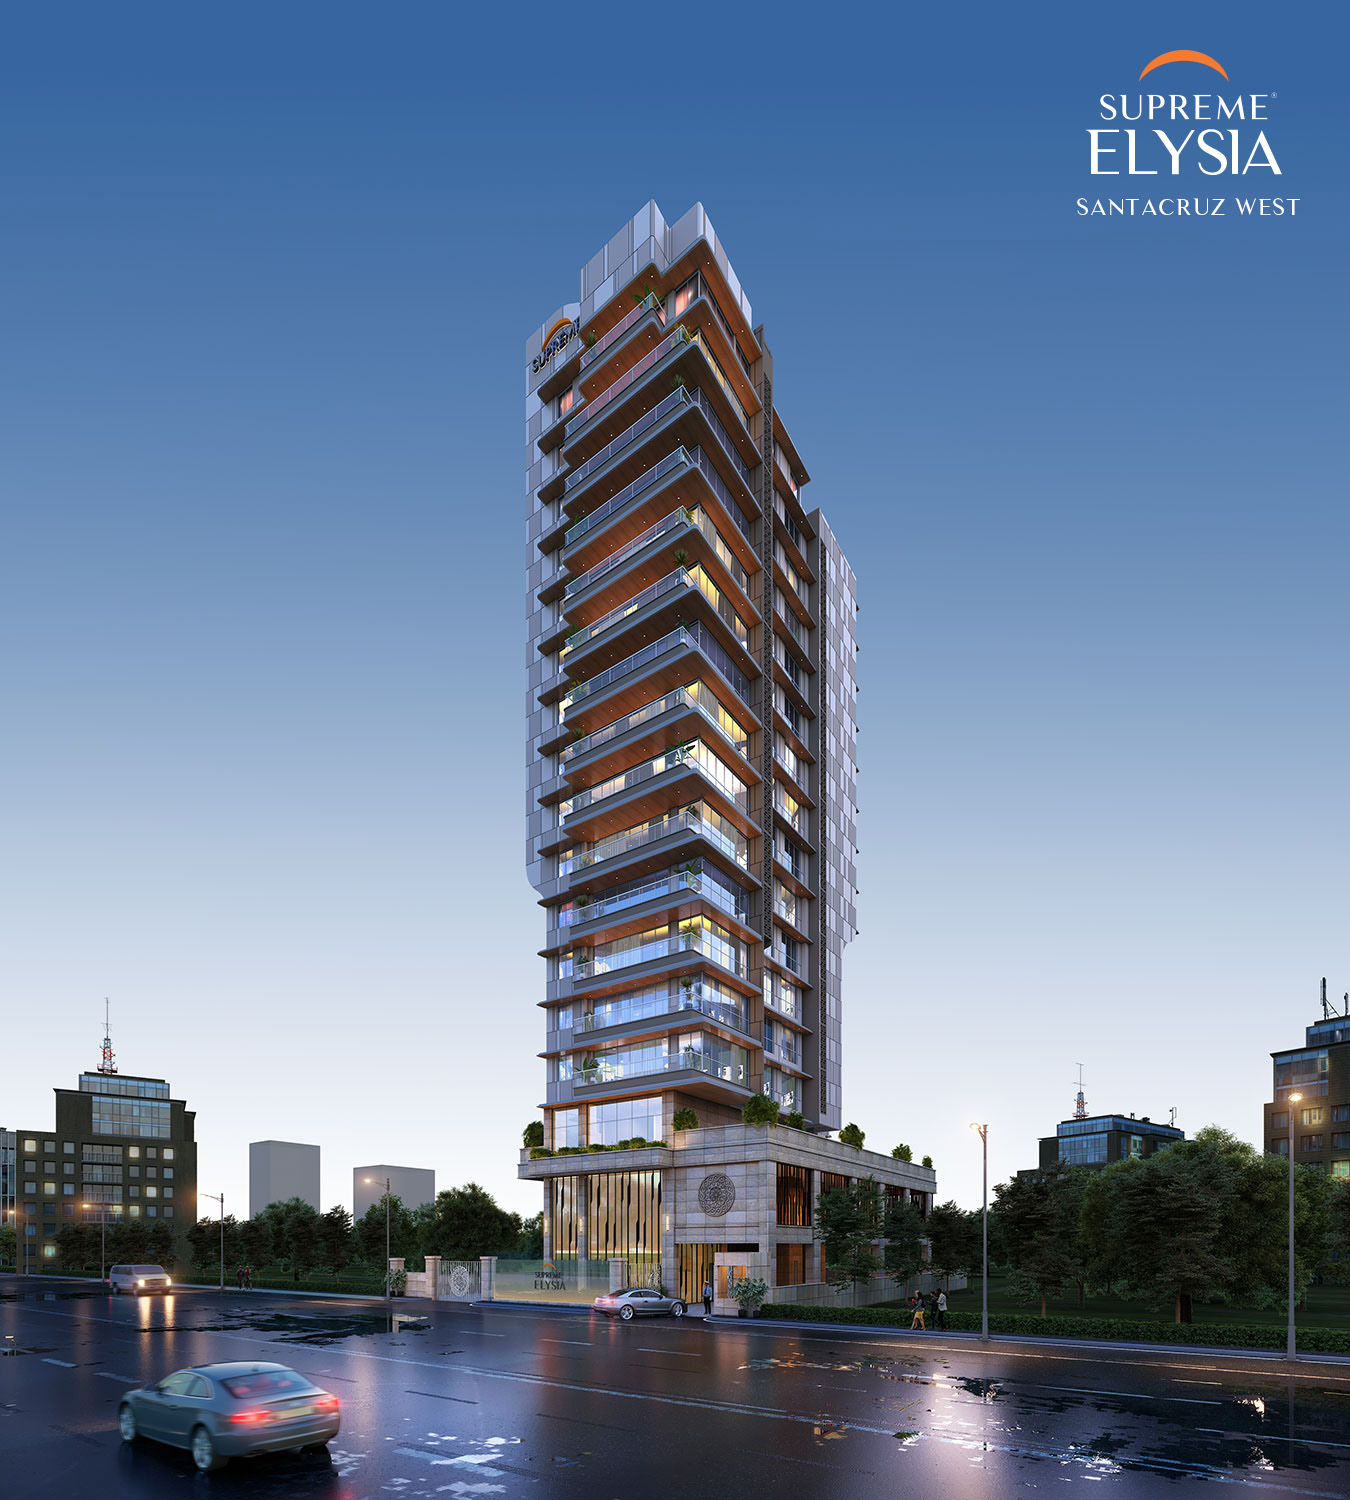 A Supremely Blissful Lifestyle Awaits At Supreme Elysia